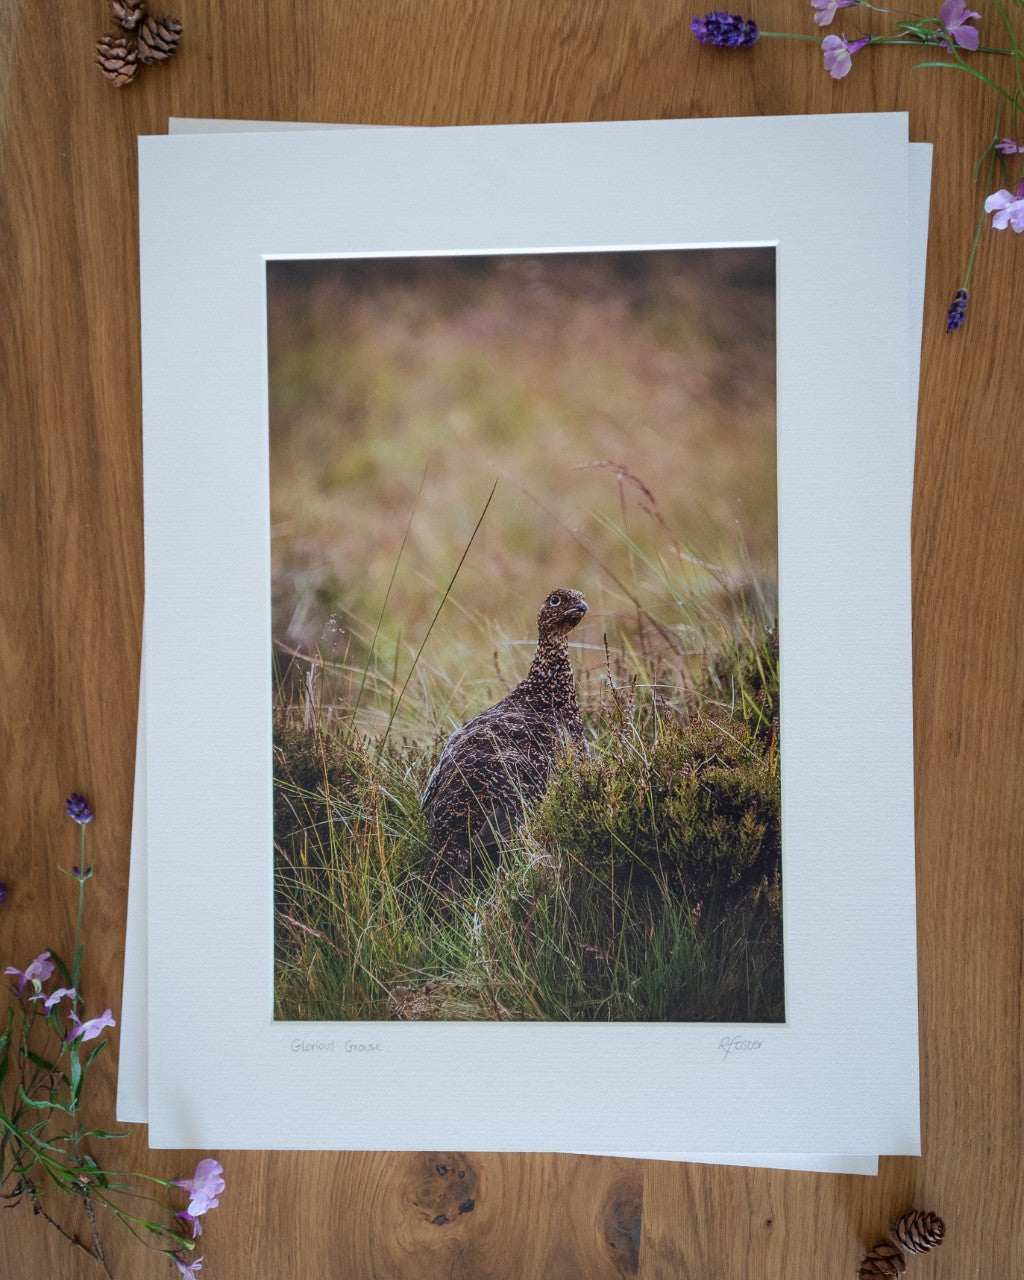 Glorious Grouse - Photographic Print by Rachel Foster